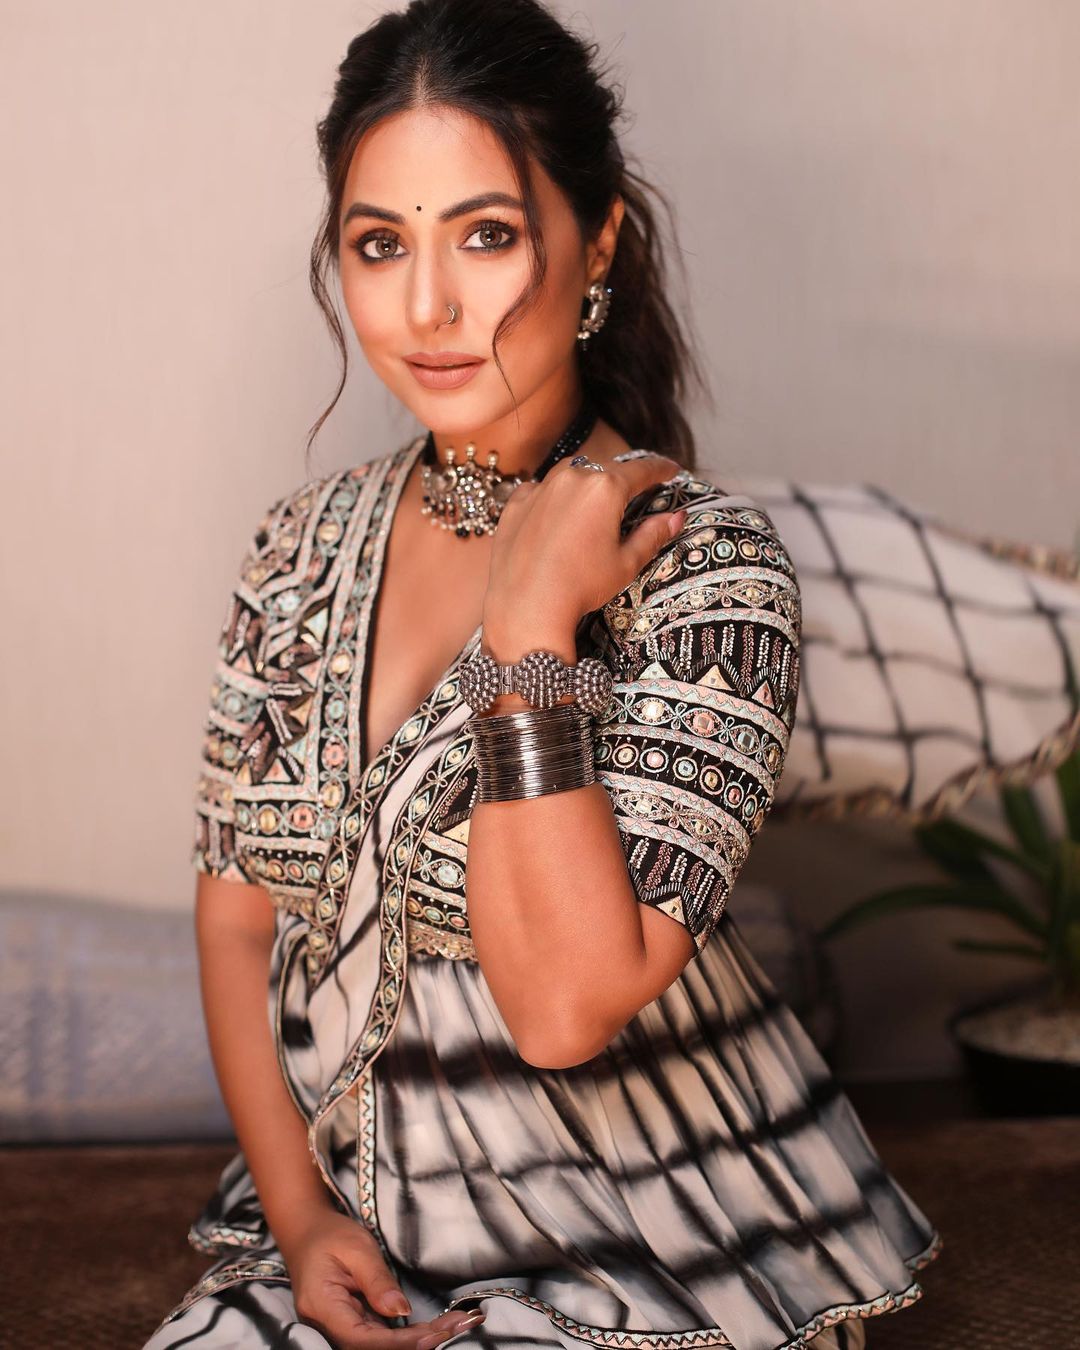 Hina Khan looks spectacular in the black and white saree